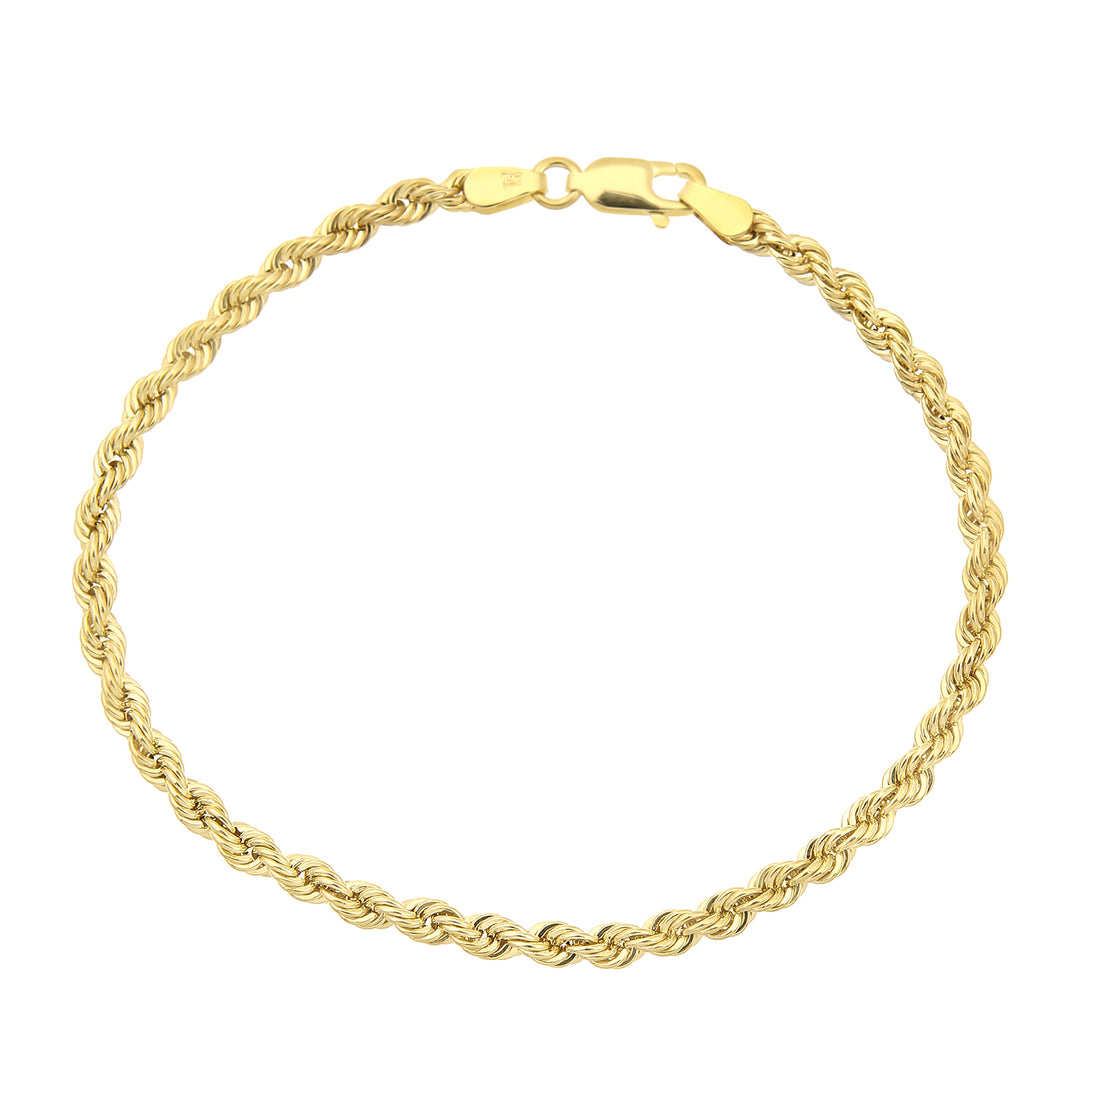 9ct Yellow Gold Rope Bracelet of 7.5 Inch/19cm Length